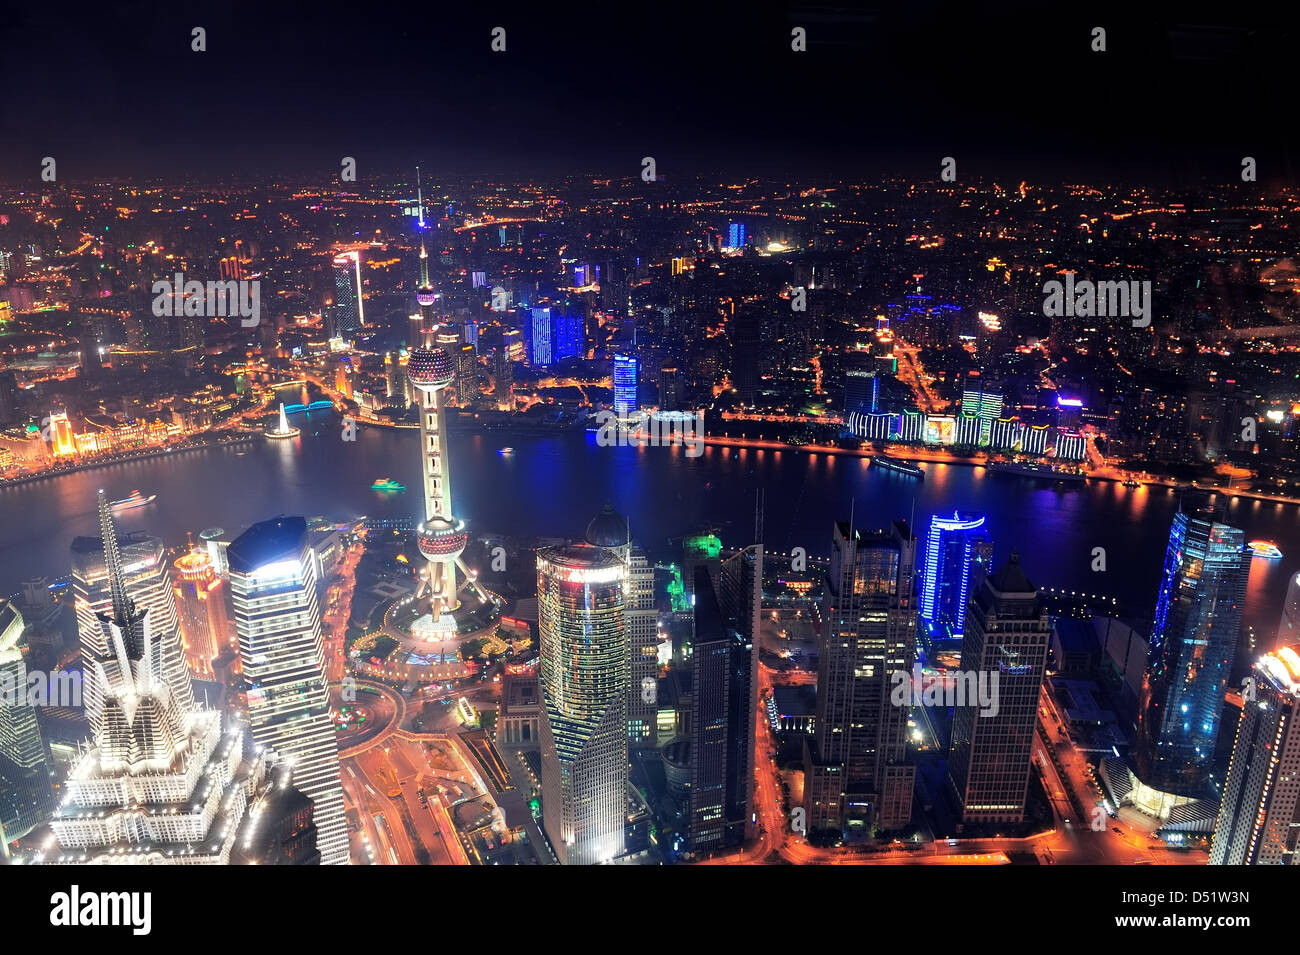 Shanghai city aerial view at night with lights and urban architecture Stock Photo